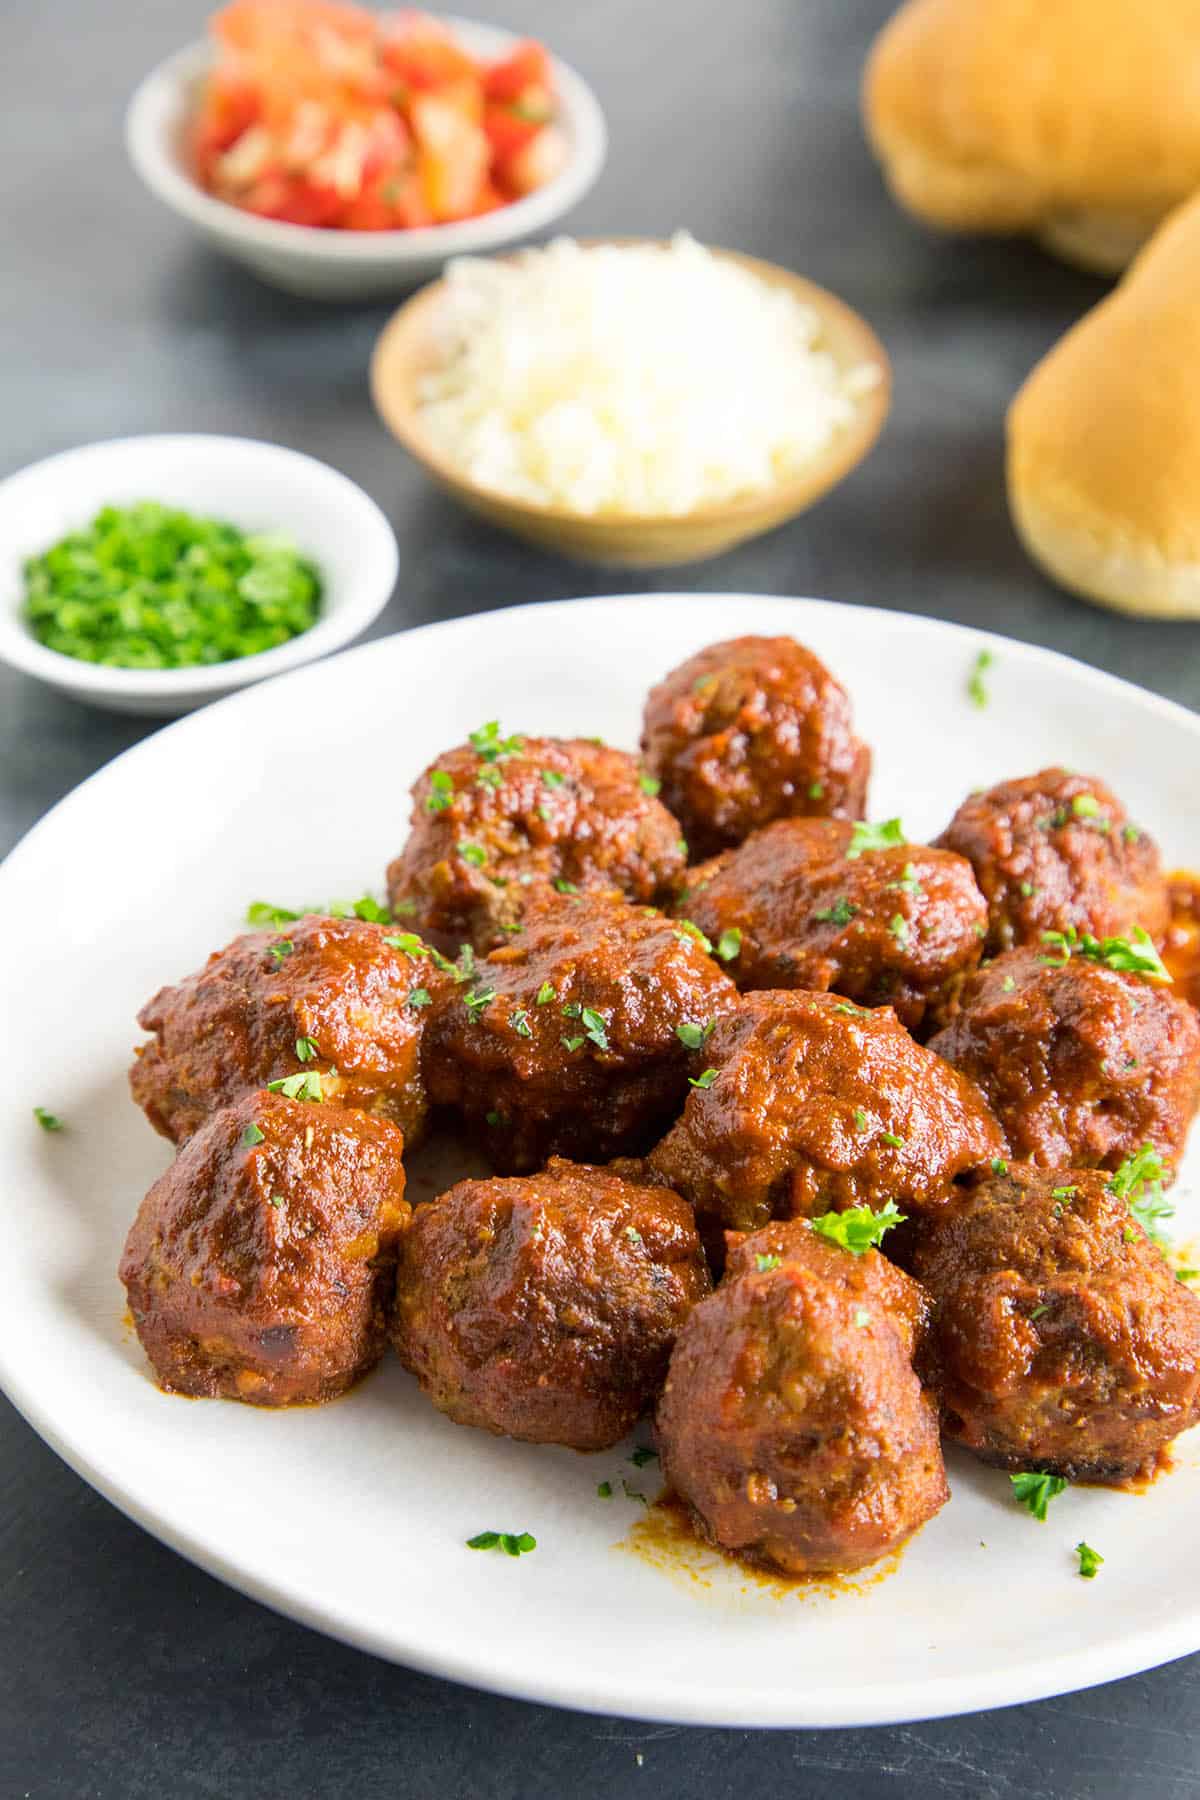 Spicy Meatballs in Chipotle-Lime Sauce - Recipe